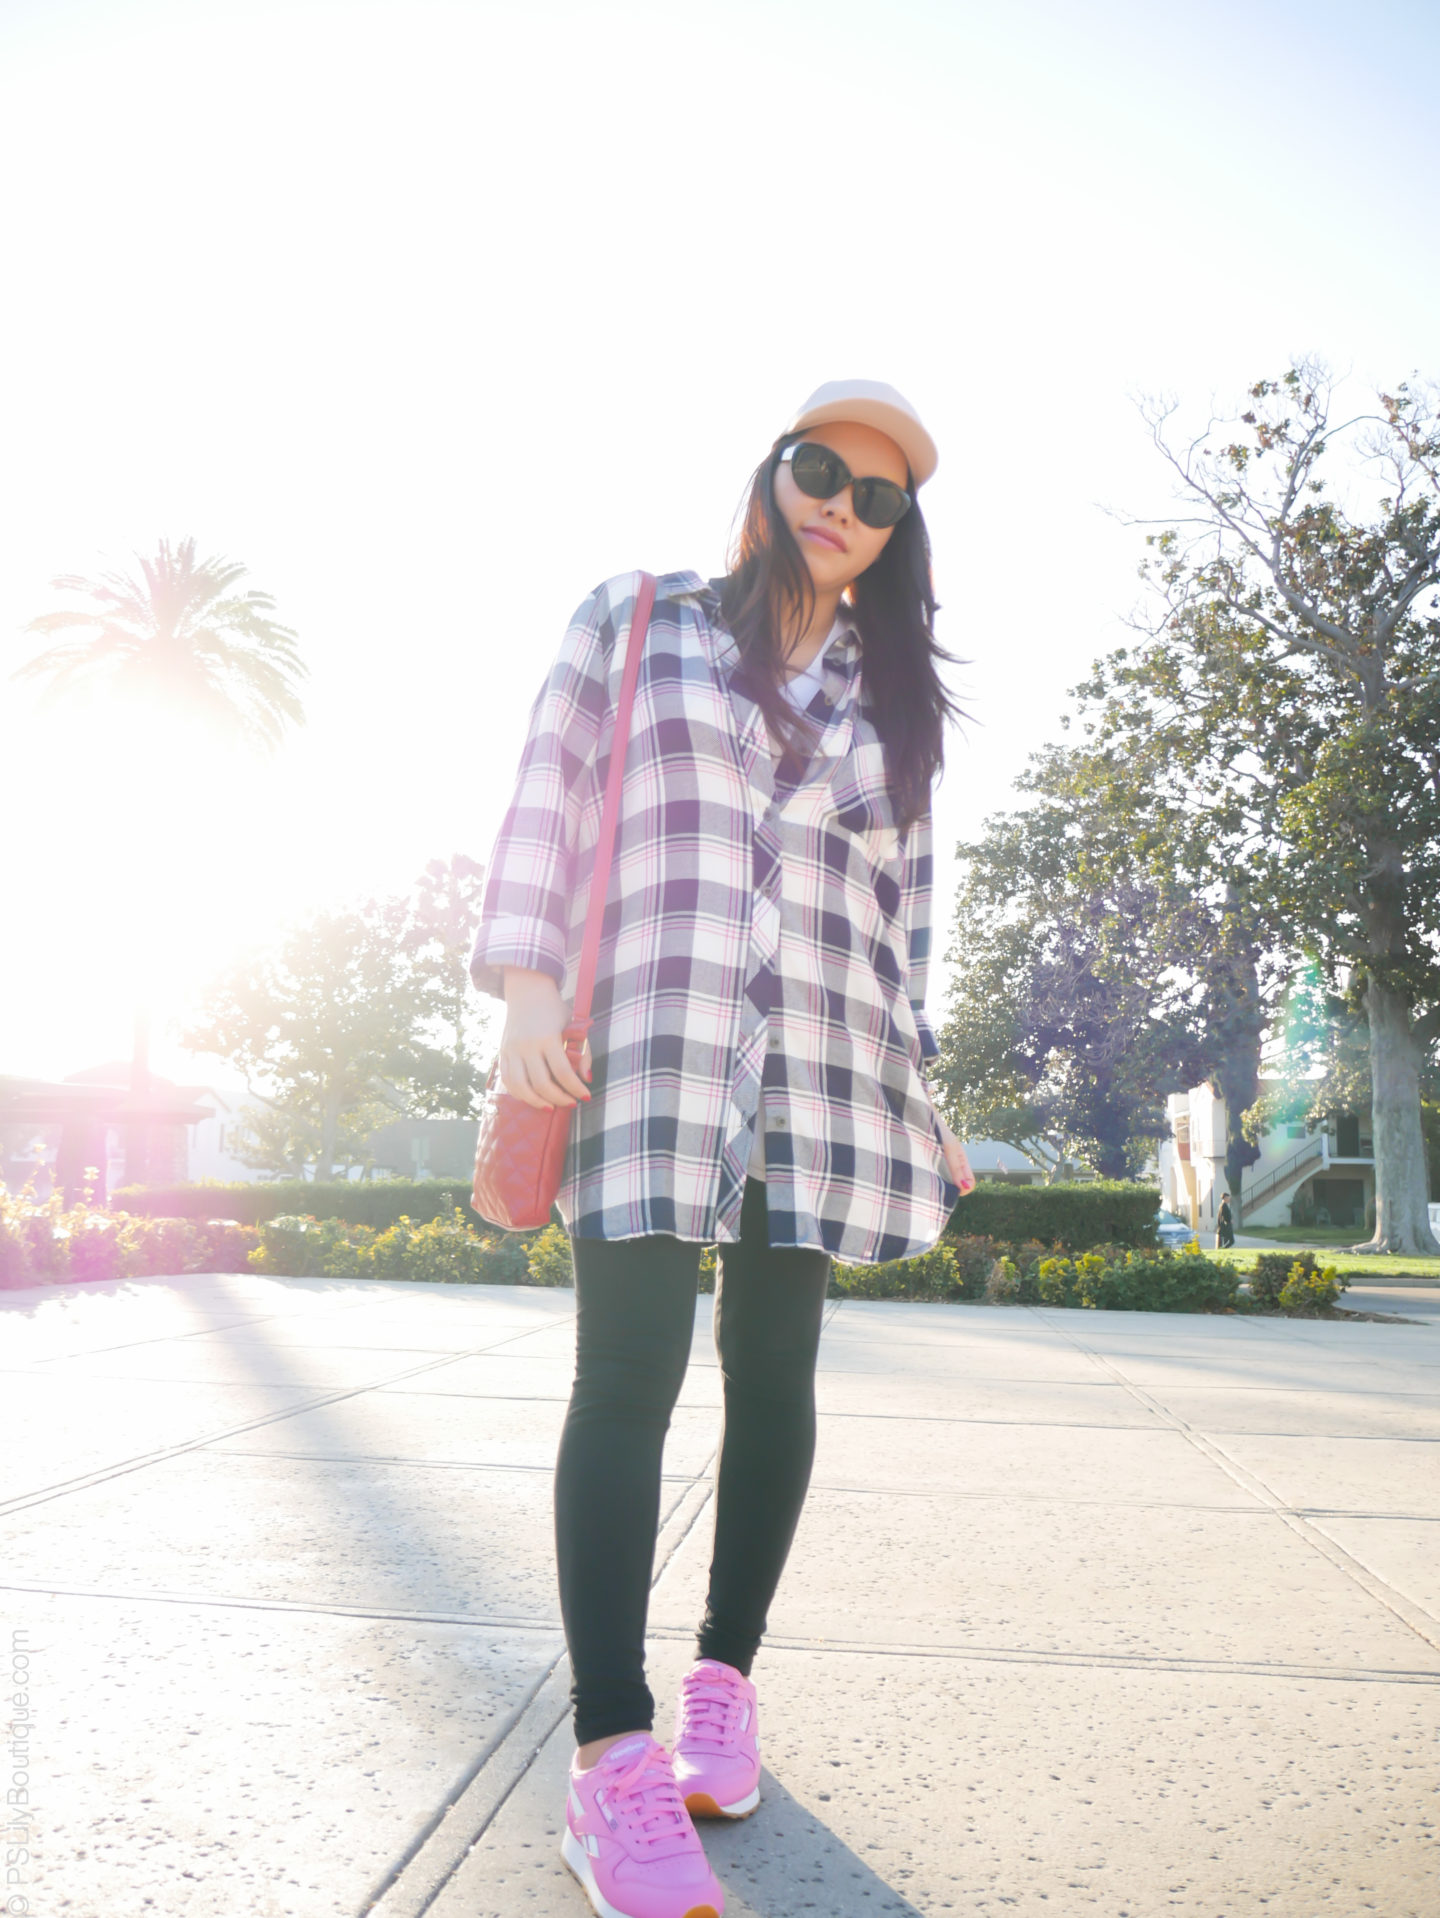 Gone Plaid... – PSLily Boutique | A Los Angeles Based Lifestyle and Fashion Blog by Lily, Instagram: @pslilyboutique, Pinterest, Los Angeles fashion blogger, top fashion blog, best fashion blog, fashion & personal style blog, travel blog, LA fashion blogger, winter 2018 outfit ideas, KUT from the Kloth blue and white plai shirt, forever 21 black leggings, pink H&M hat, pink reebok classic sneakers shoes, 2.6.18, luxury fashion blogger, chicago fashion blogger